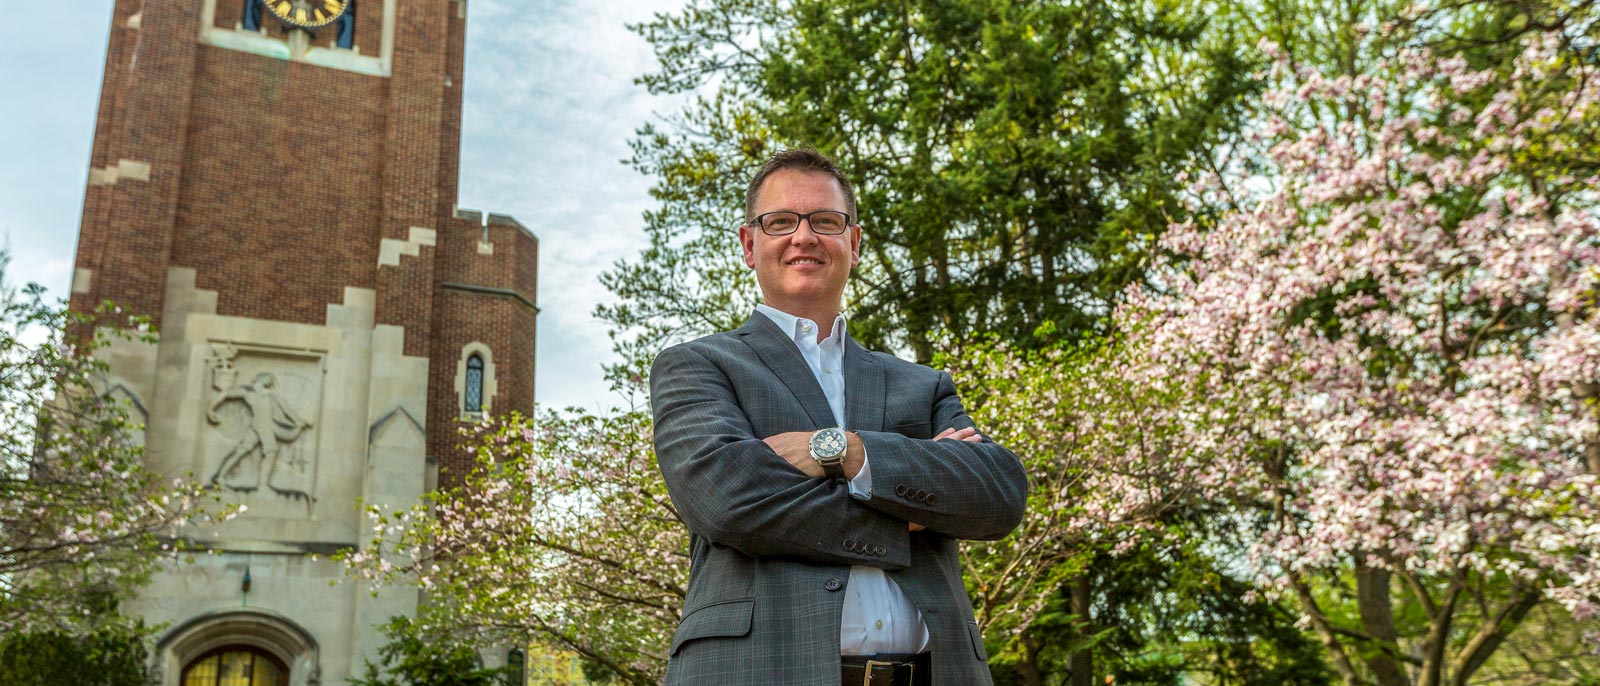 M.S. MSL graduate Jeff Day stands with arms crossed in front of Beaumont Tower and blooming flowering trees on the campus of MSU